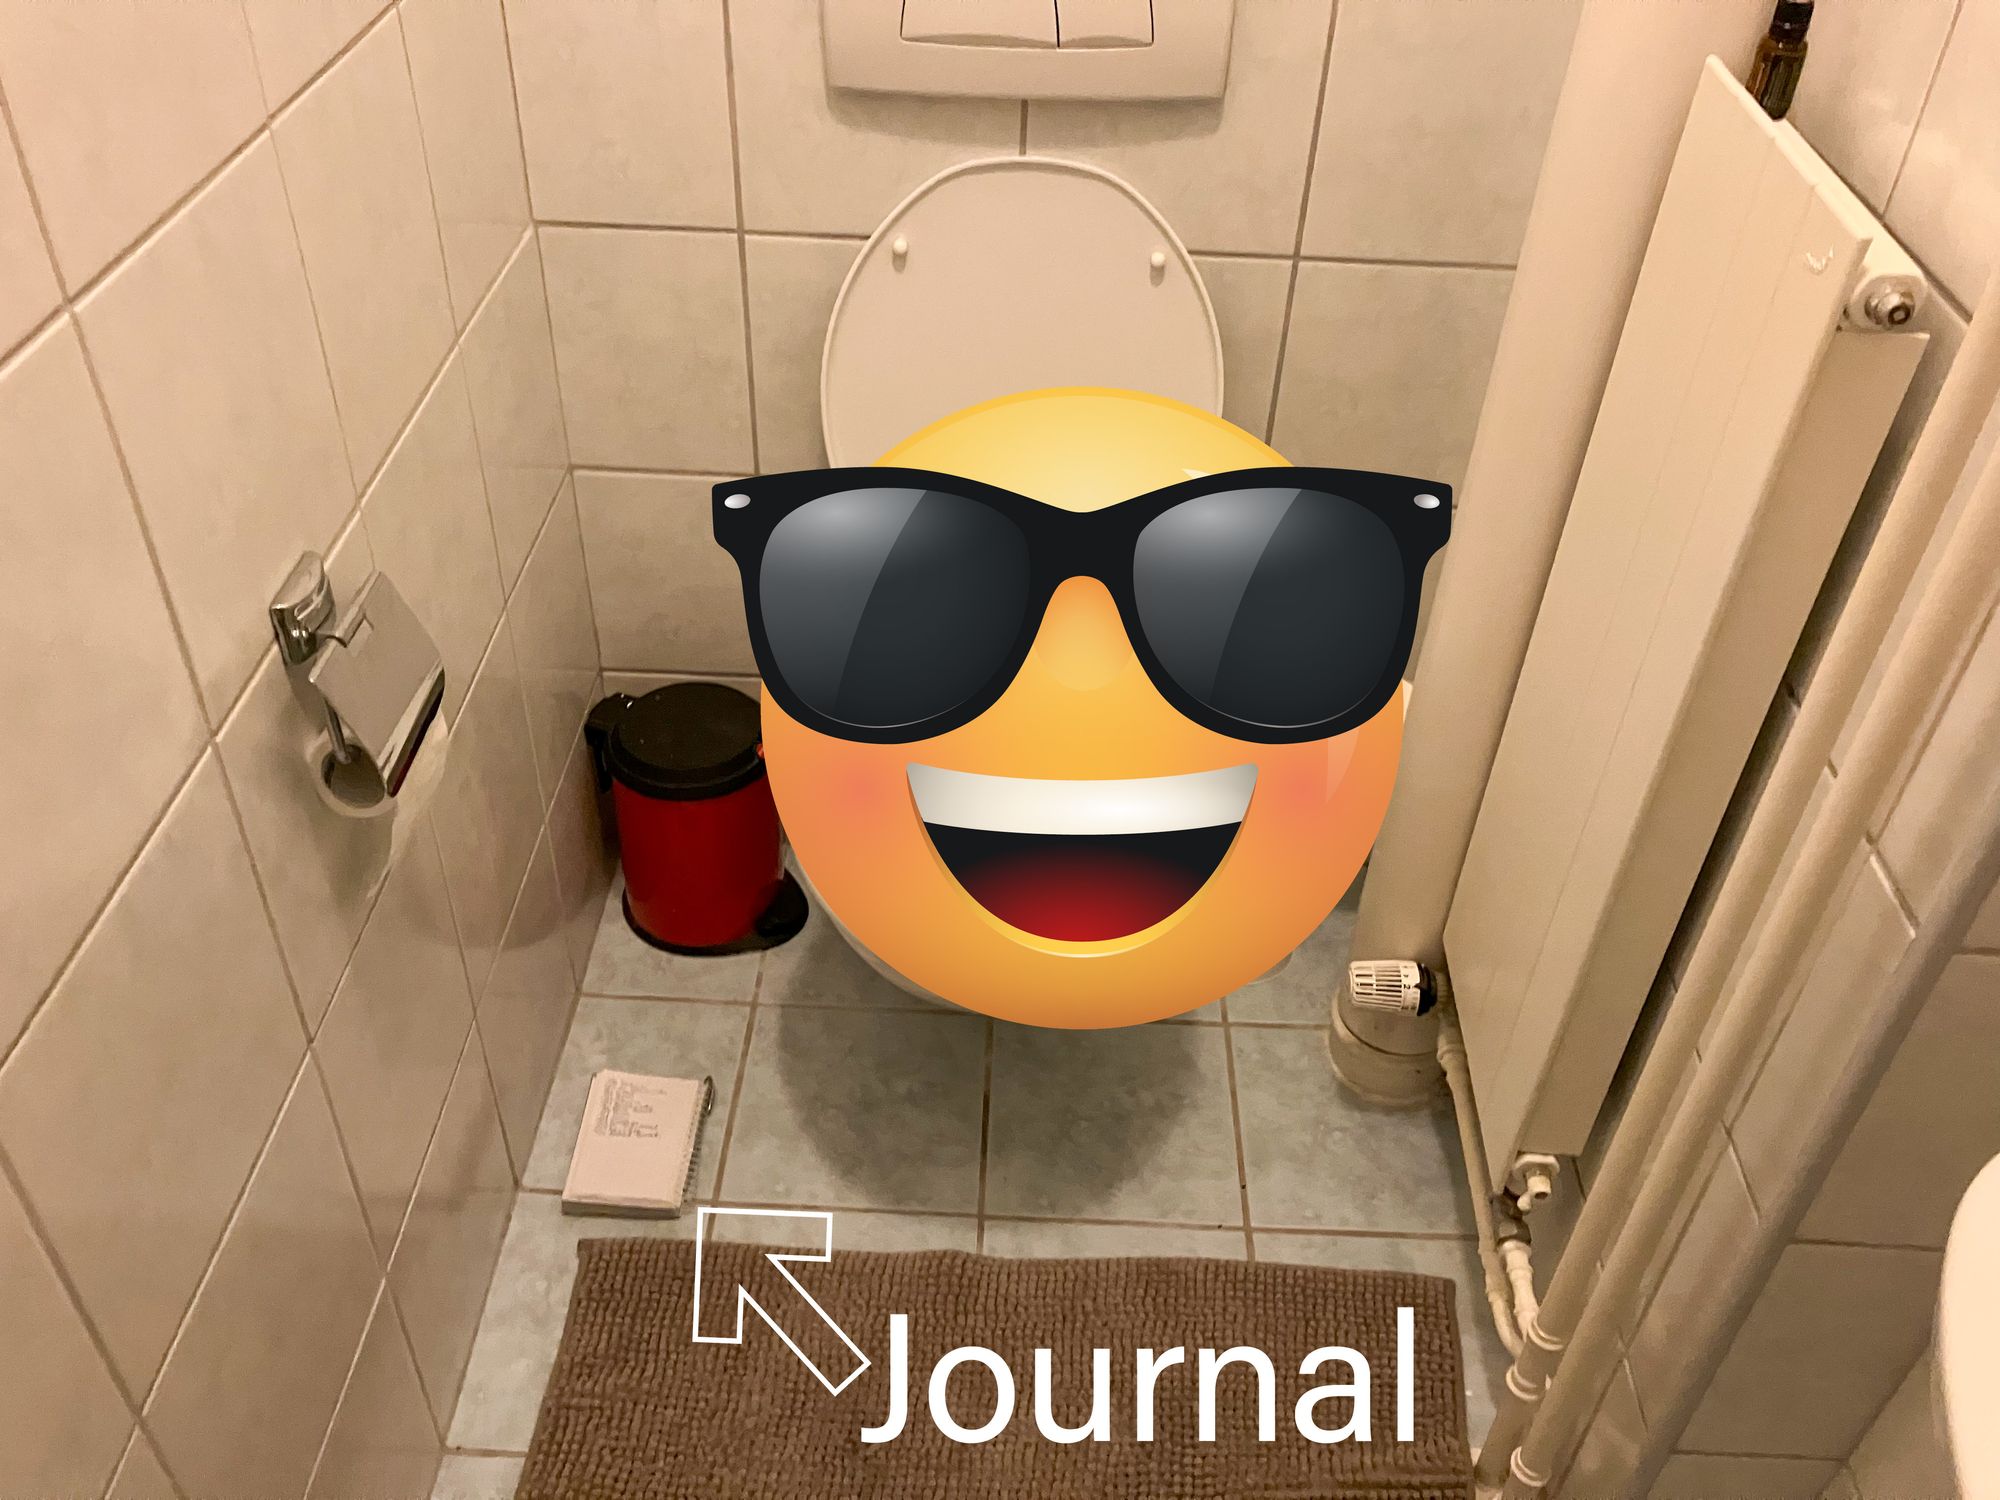 i placed the journal next to the toilet 